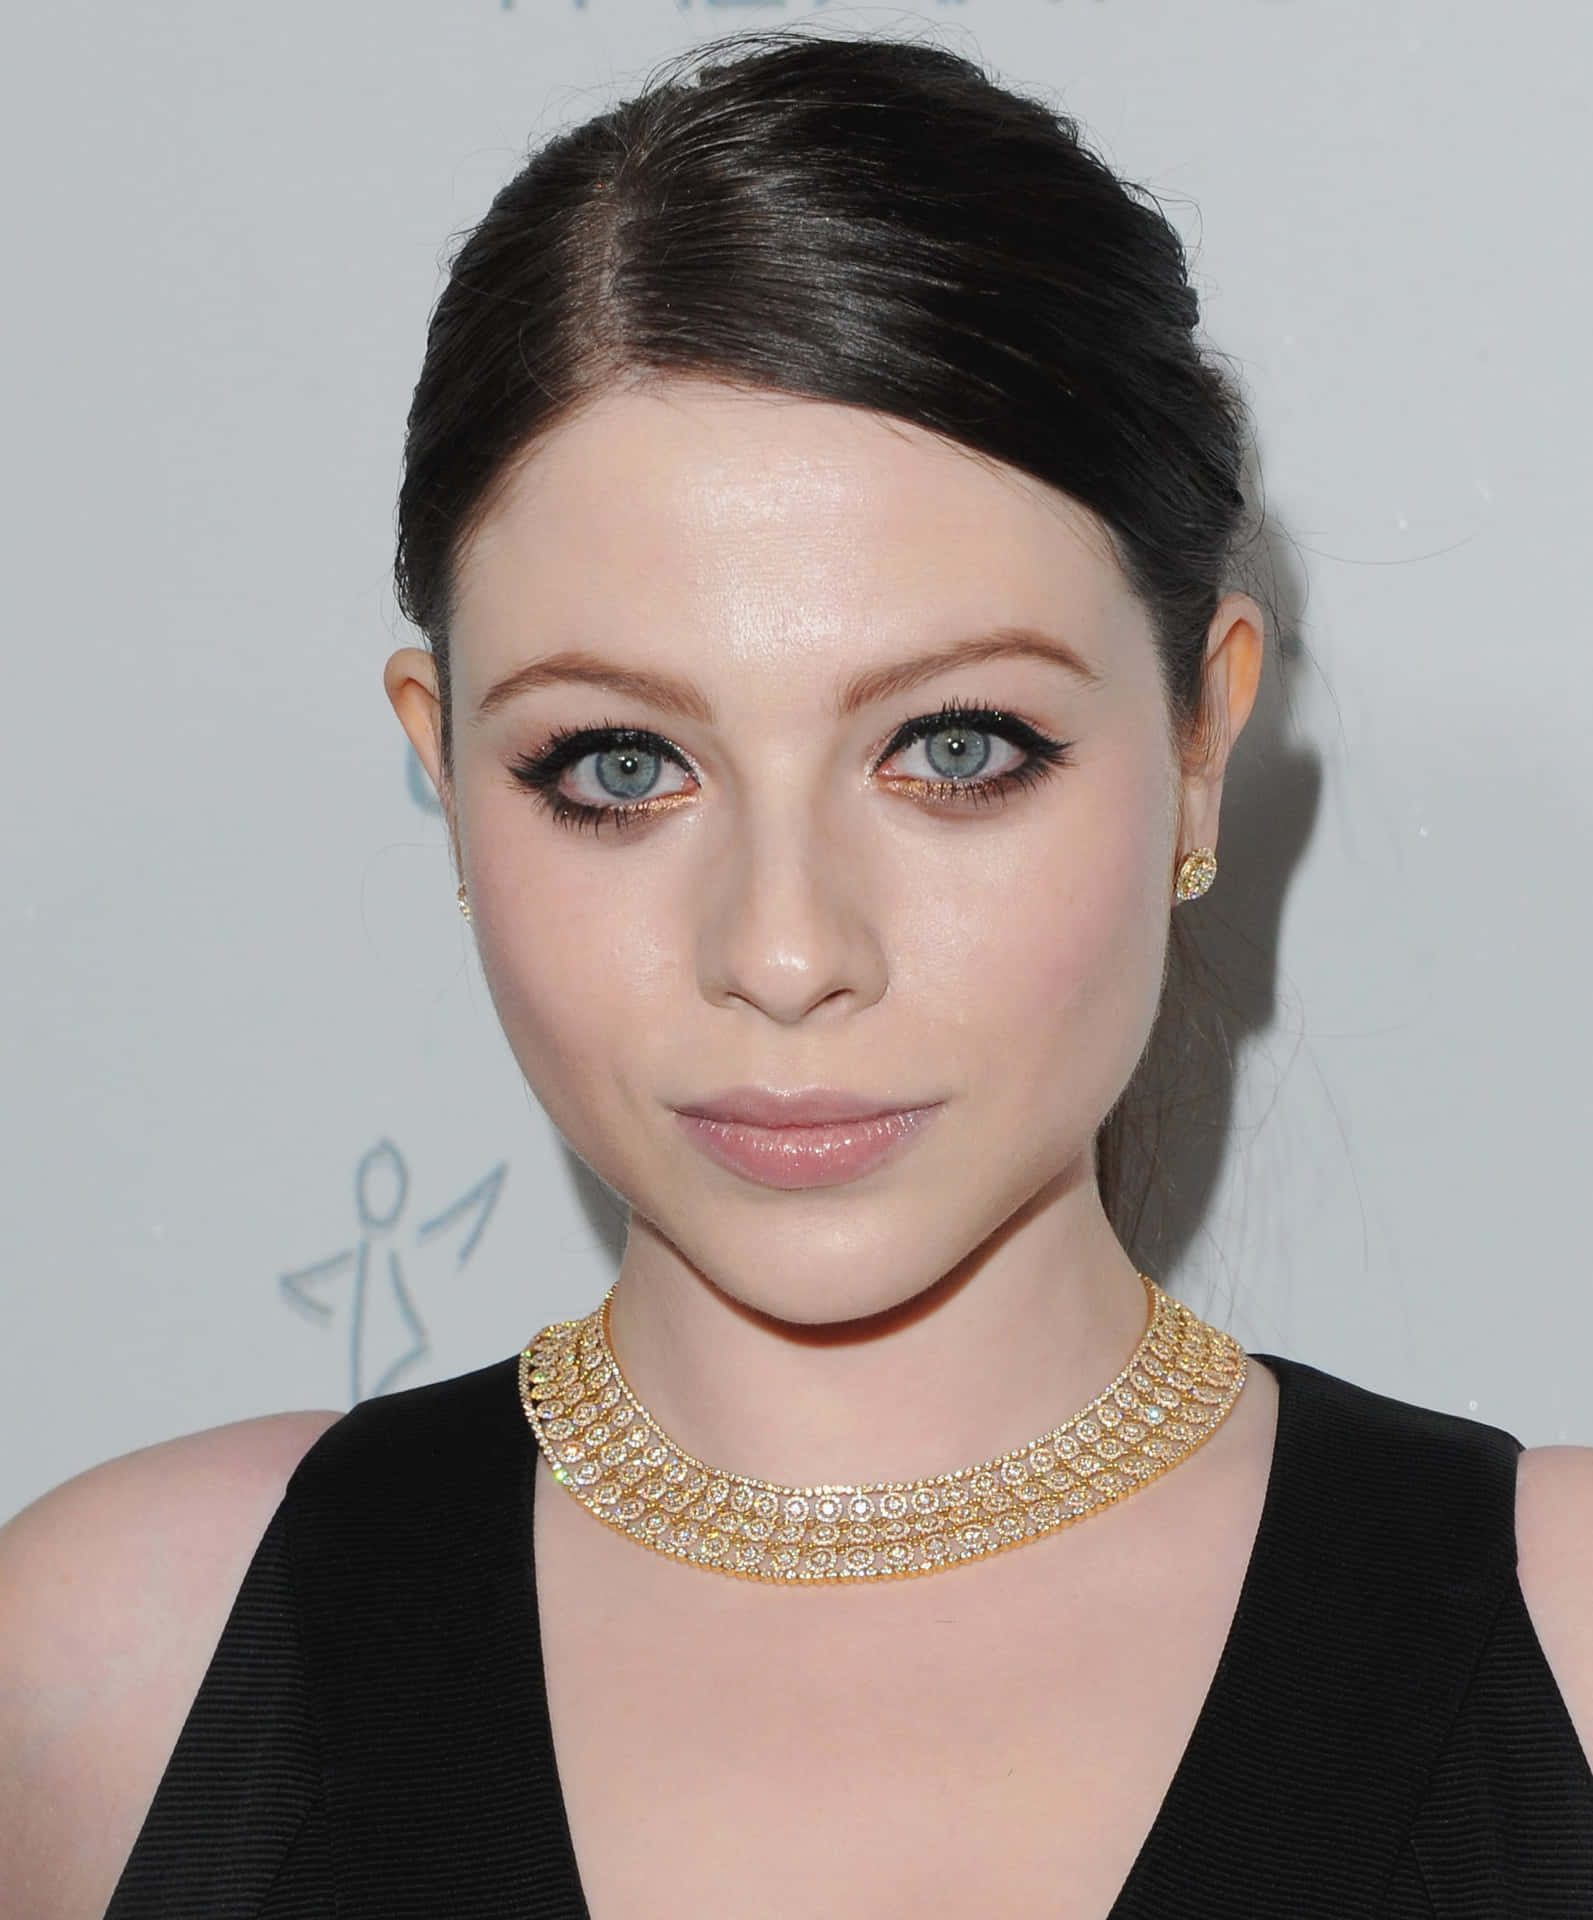 Michelle Trachtenberg Striking A Pose In A Stylish Outfit